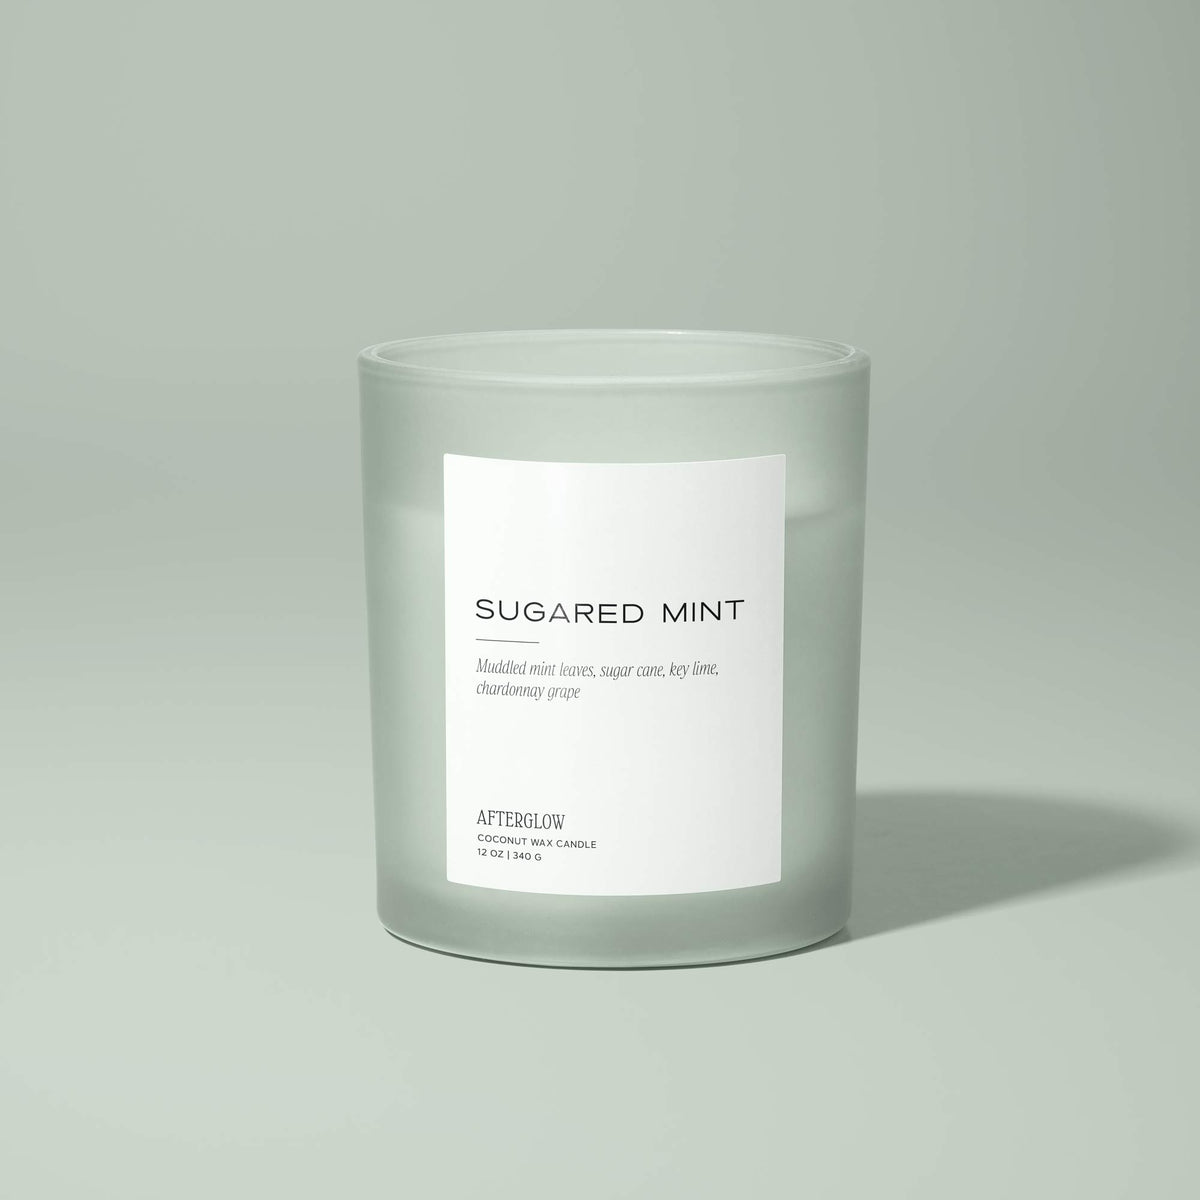 Afterglow's Sugared Mint jar candle with a light green background